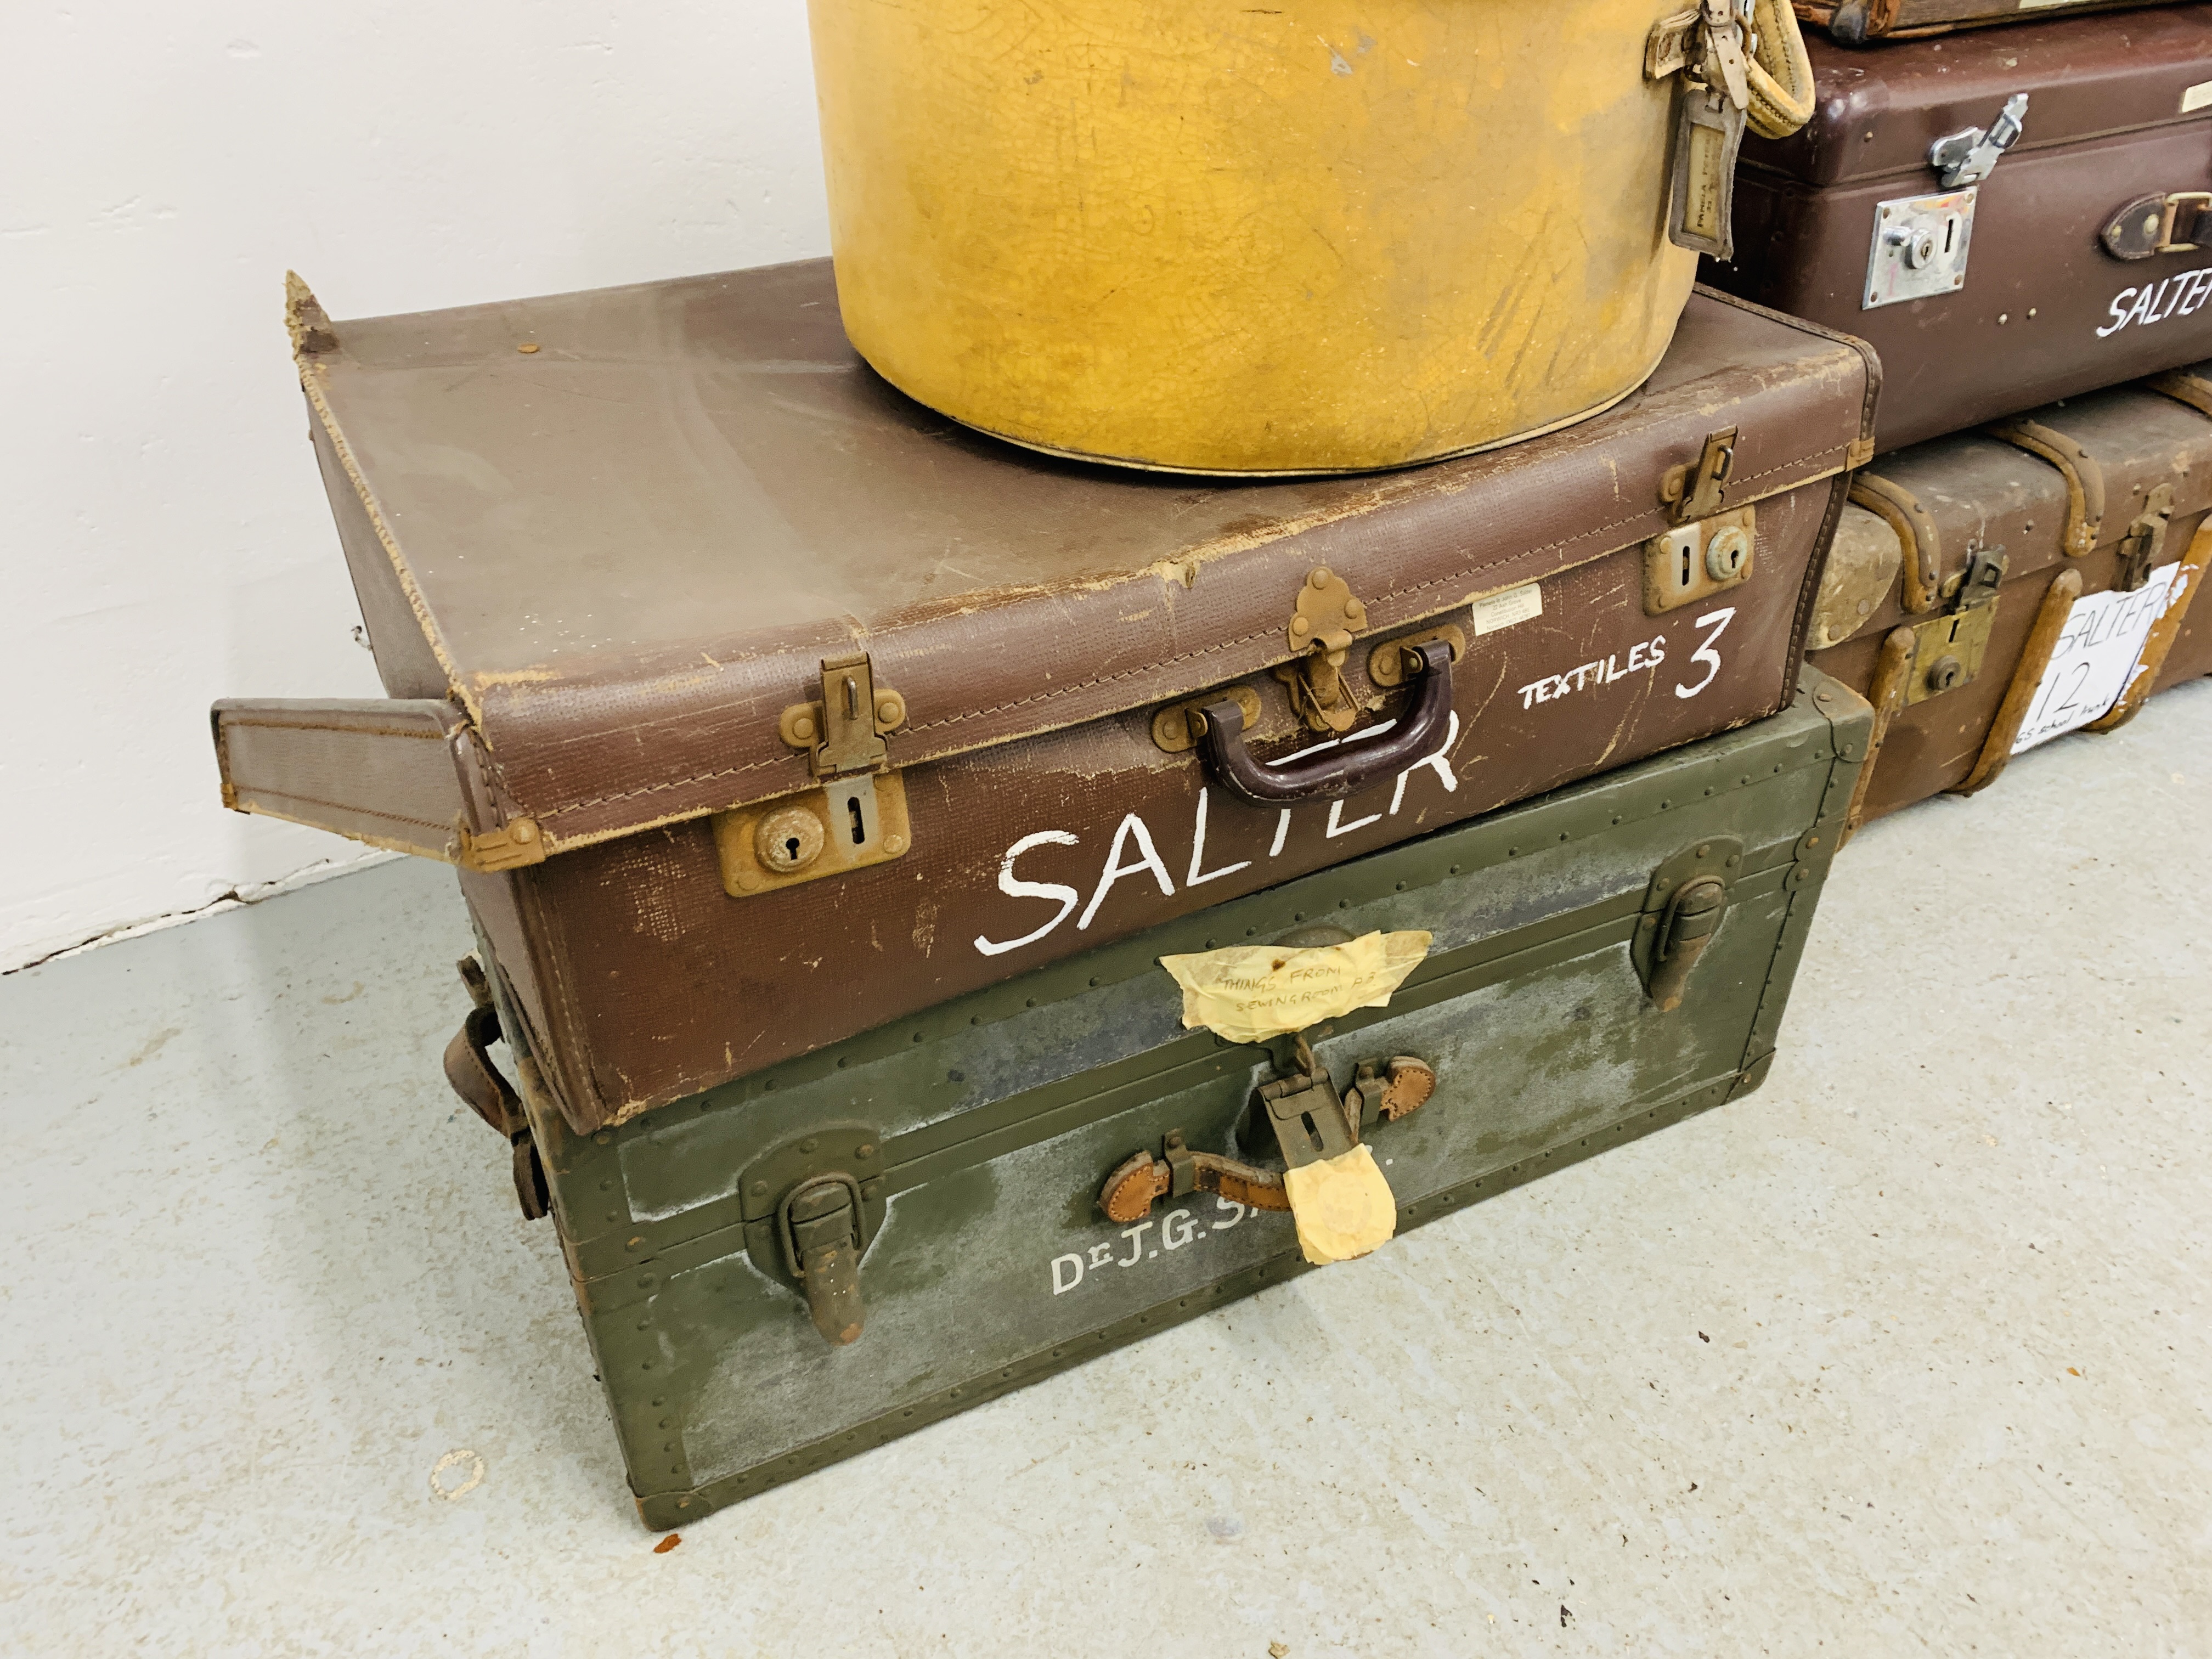 SIX VARIOUS VINTAGE TRAVEL TRUNKS / LUGGAGE BAGS TO INCLUDE MILLER MANUFACTURING METAL BOUND - Image 7 of 7